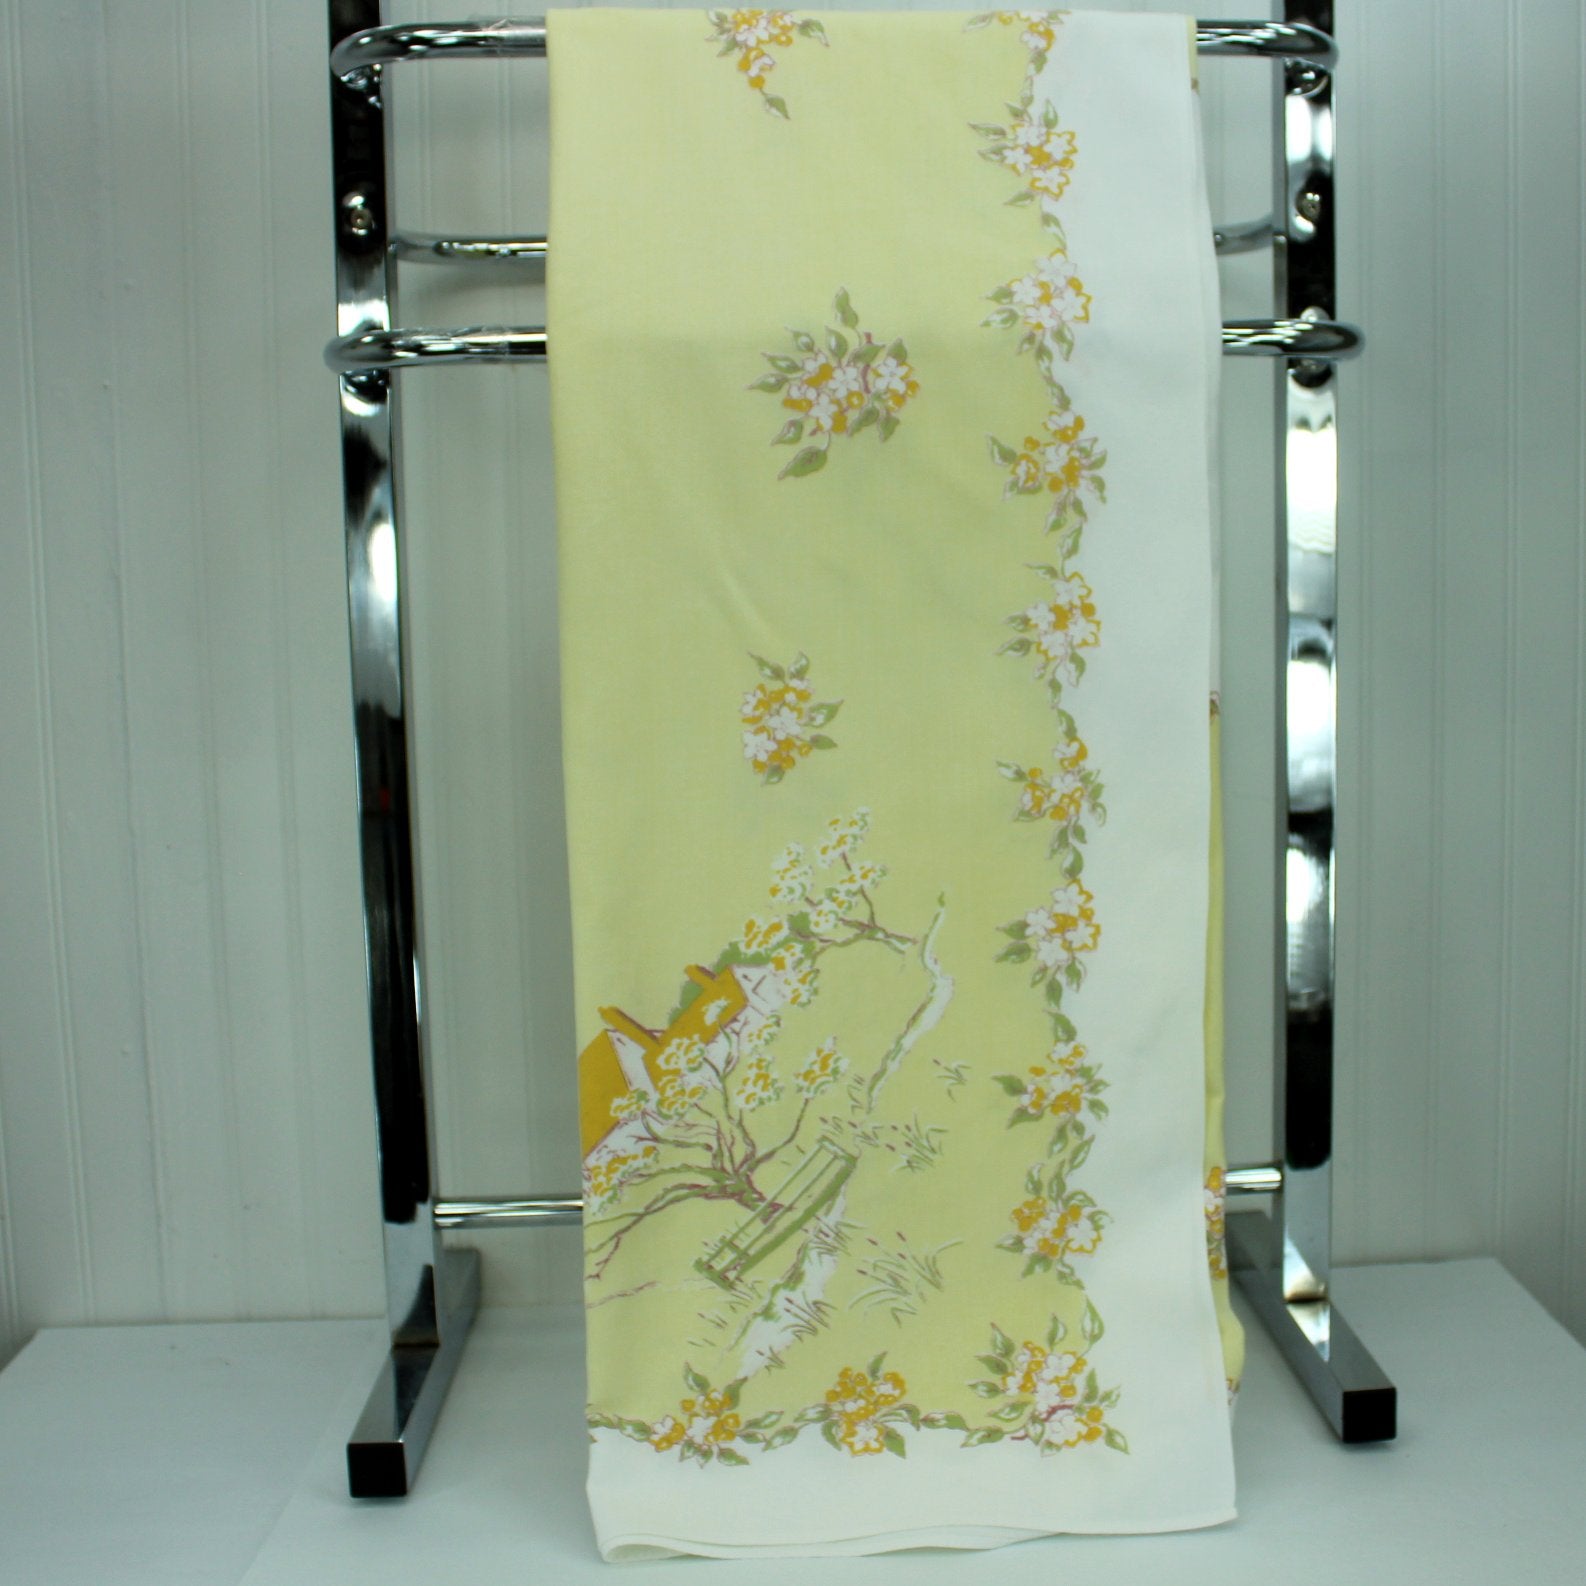 Kate Greenaway  Leacock "Somerset" Tablecloth Yellow White Cottage Design linear pix of cloth